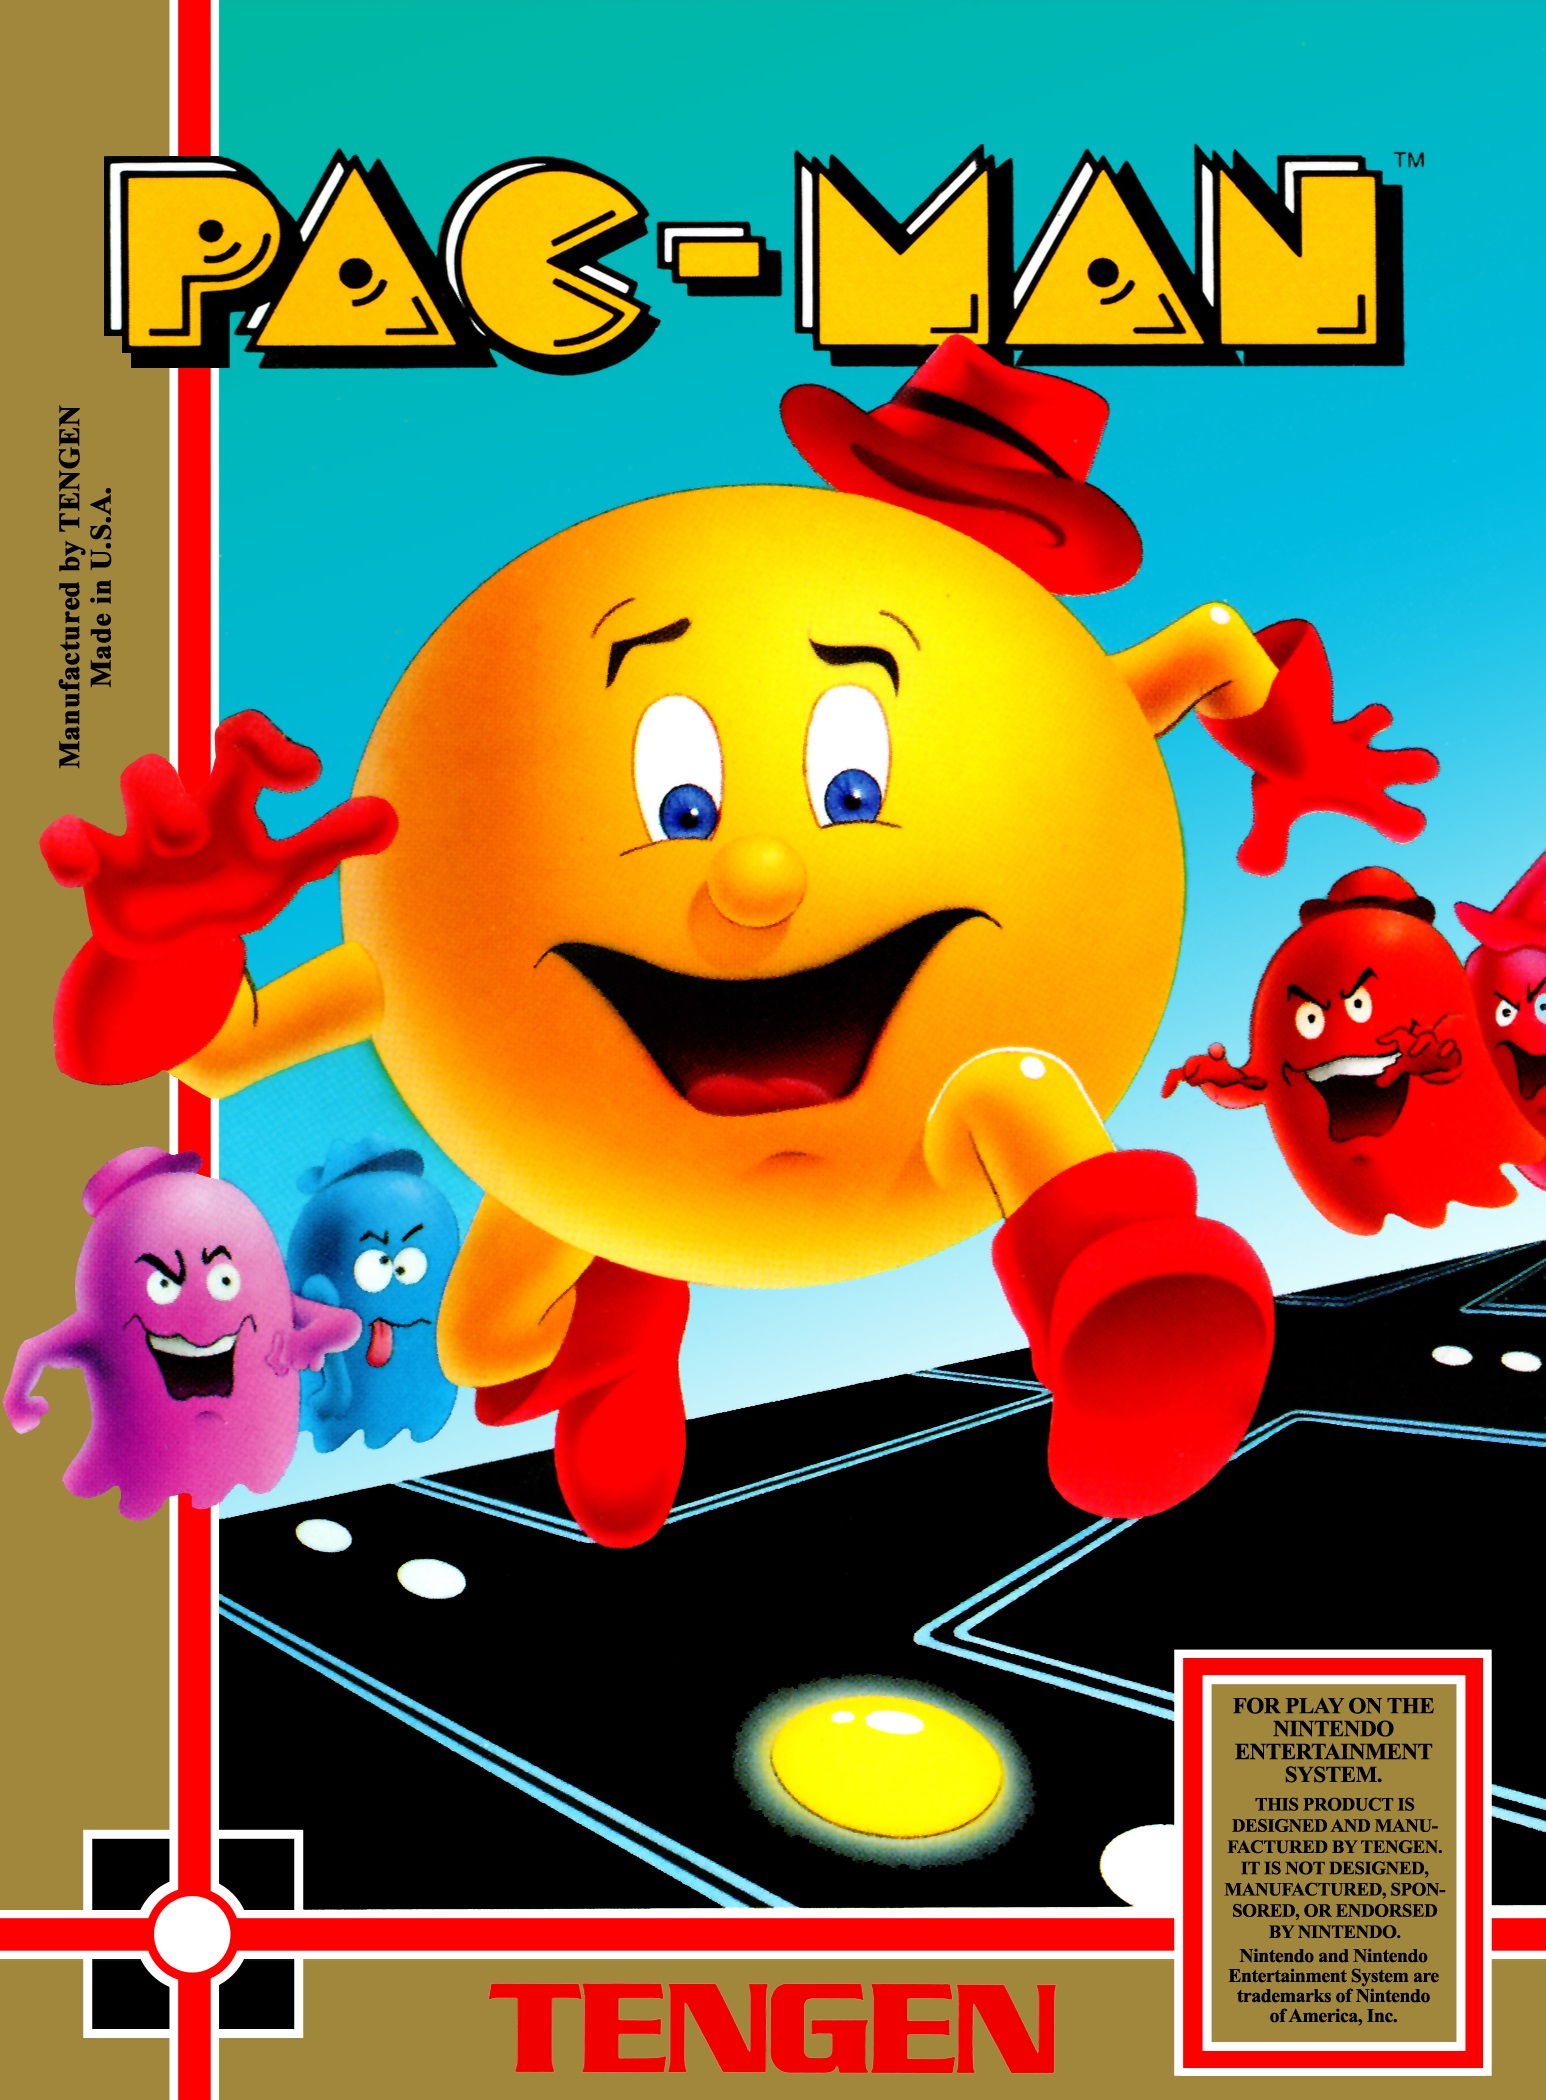 pac-man-pictures-to-download-pac-man-nes-play-games-launchbox-covers